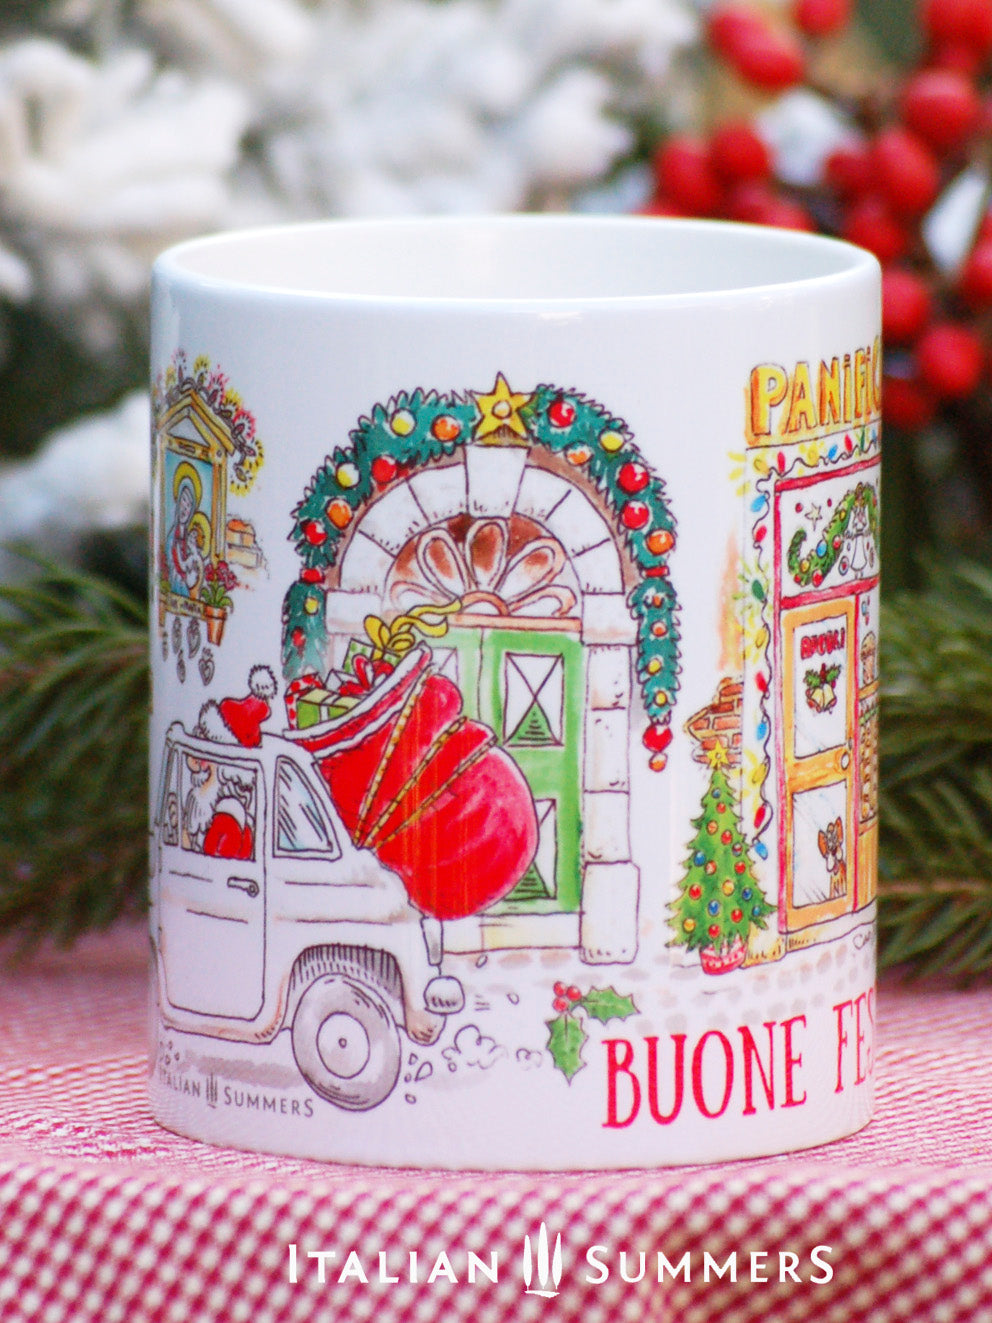 Mug Featuring Babbo Natale lovingly delivering presents through the streets of Italy, this mug is sure to get you in the holiday spirit.. Made by Italian Summers Copyrighted material